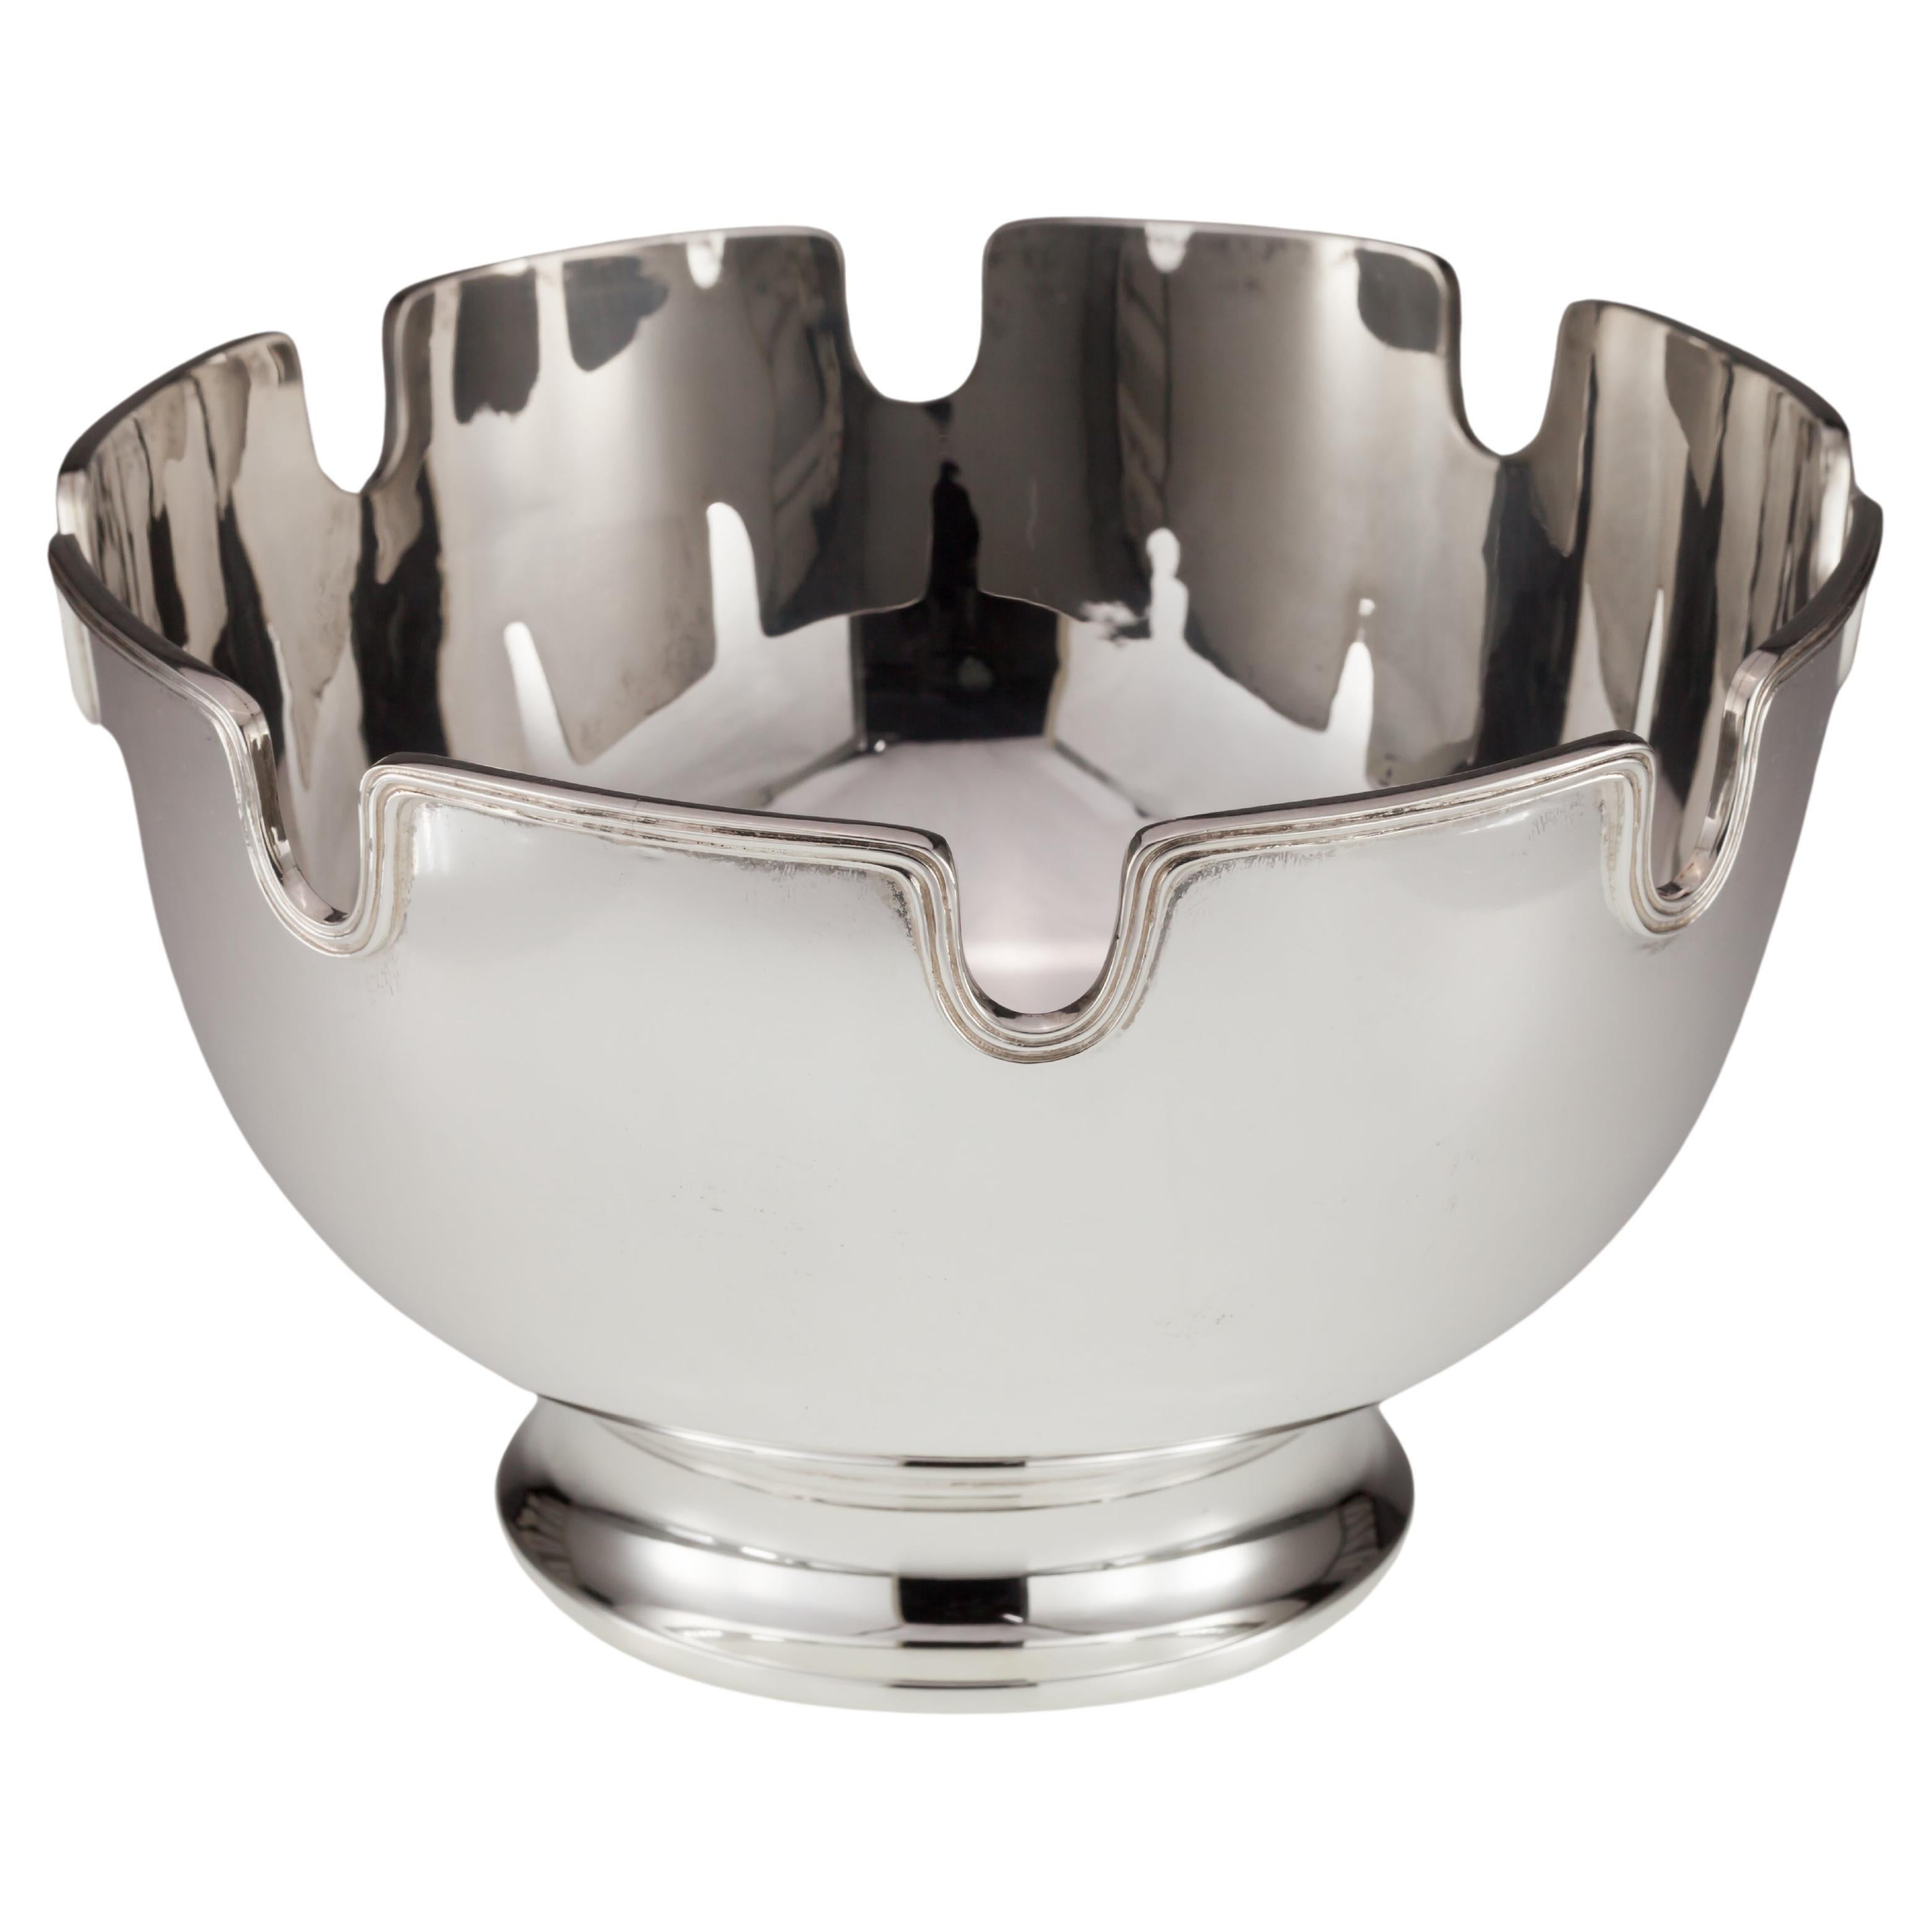 Tiffany Makers Monteith Sterling Silber Toothed Schale Wunderschön! im Angebot